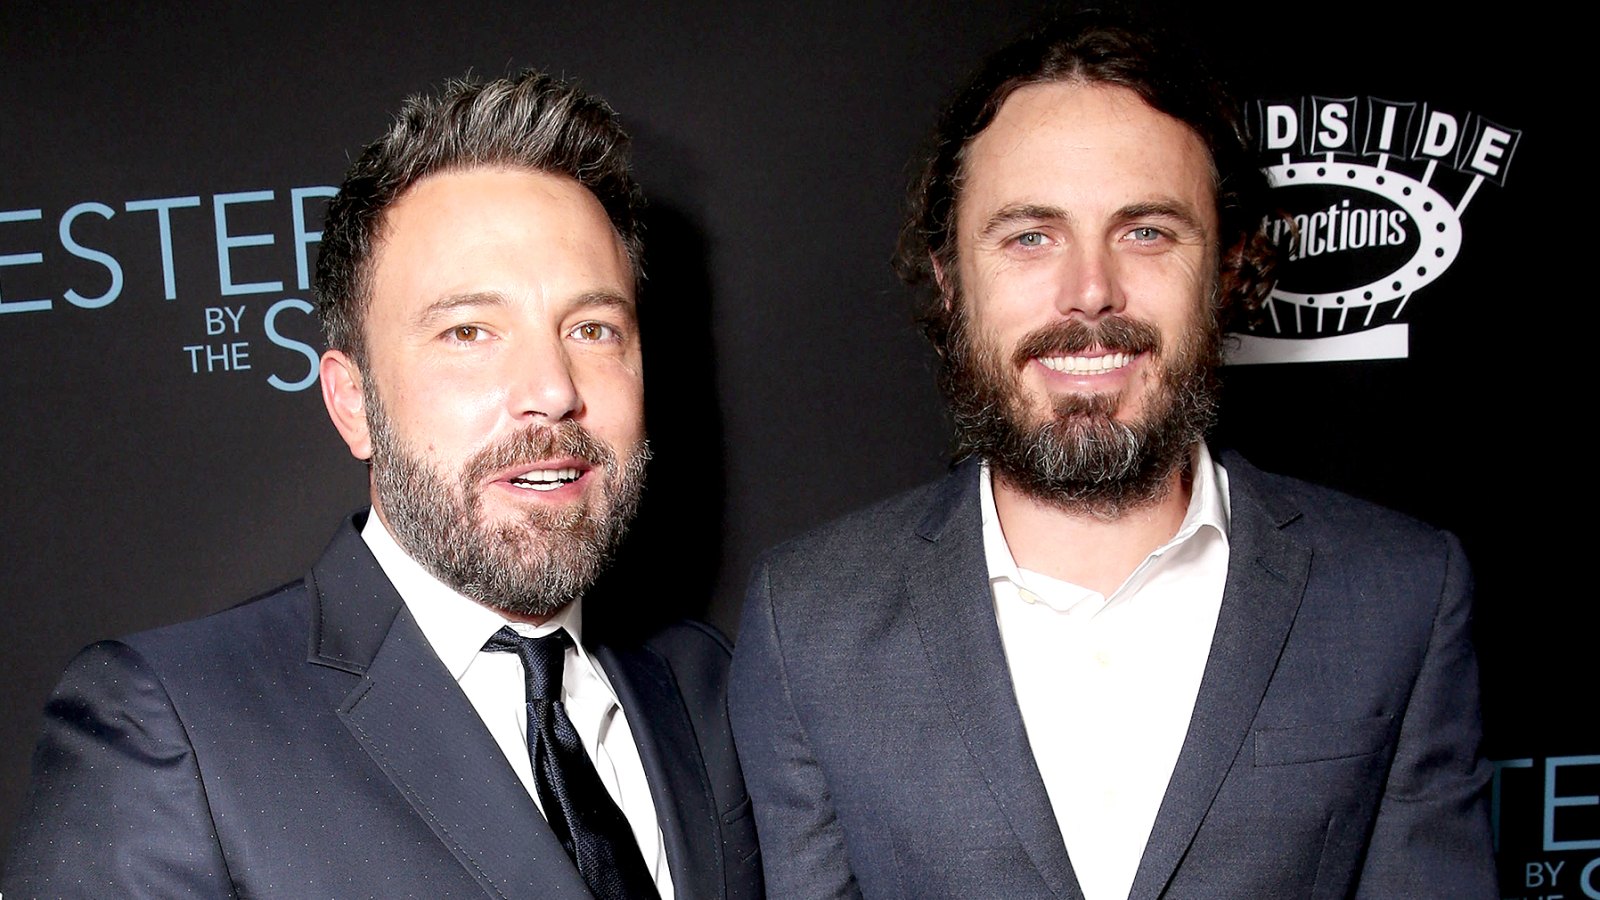 Ben Affleck and Casey Affleck attend the 'Manchester by the Sea' premiere at AMPAS Samuel Goldwyn Theater in Beverly Hills on November 14, 2016.